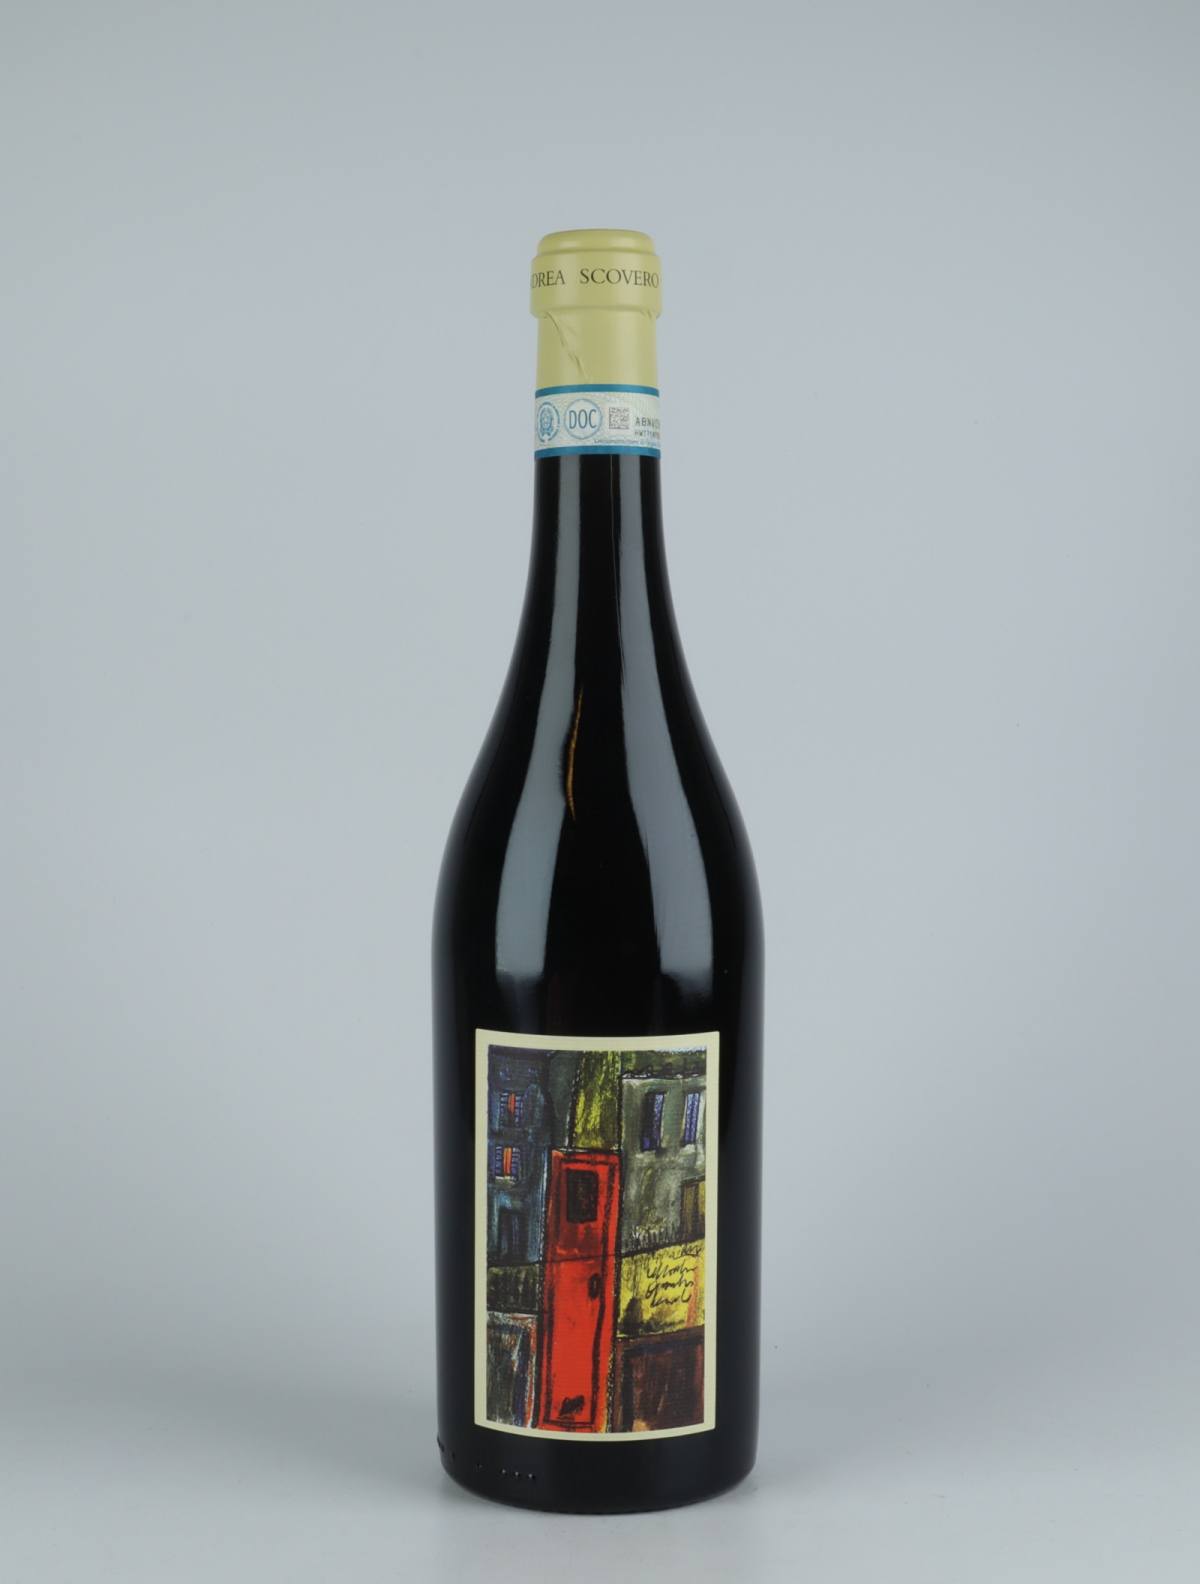 A bottle 2016 Il Clown Red wine from Andrea Scovero, Piedmont in Italy